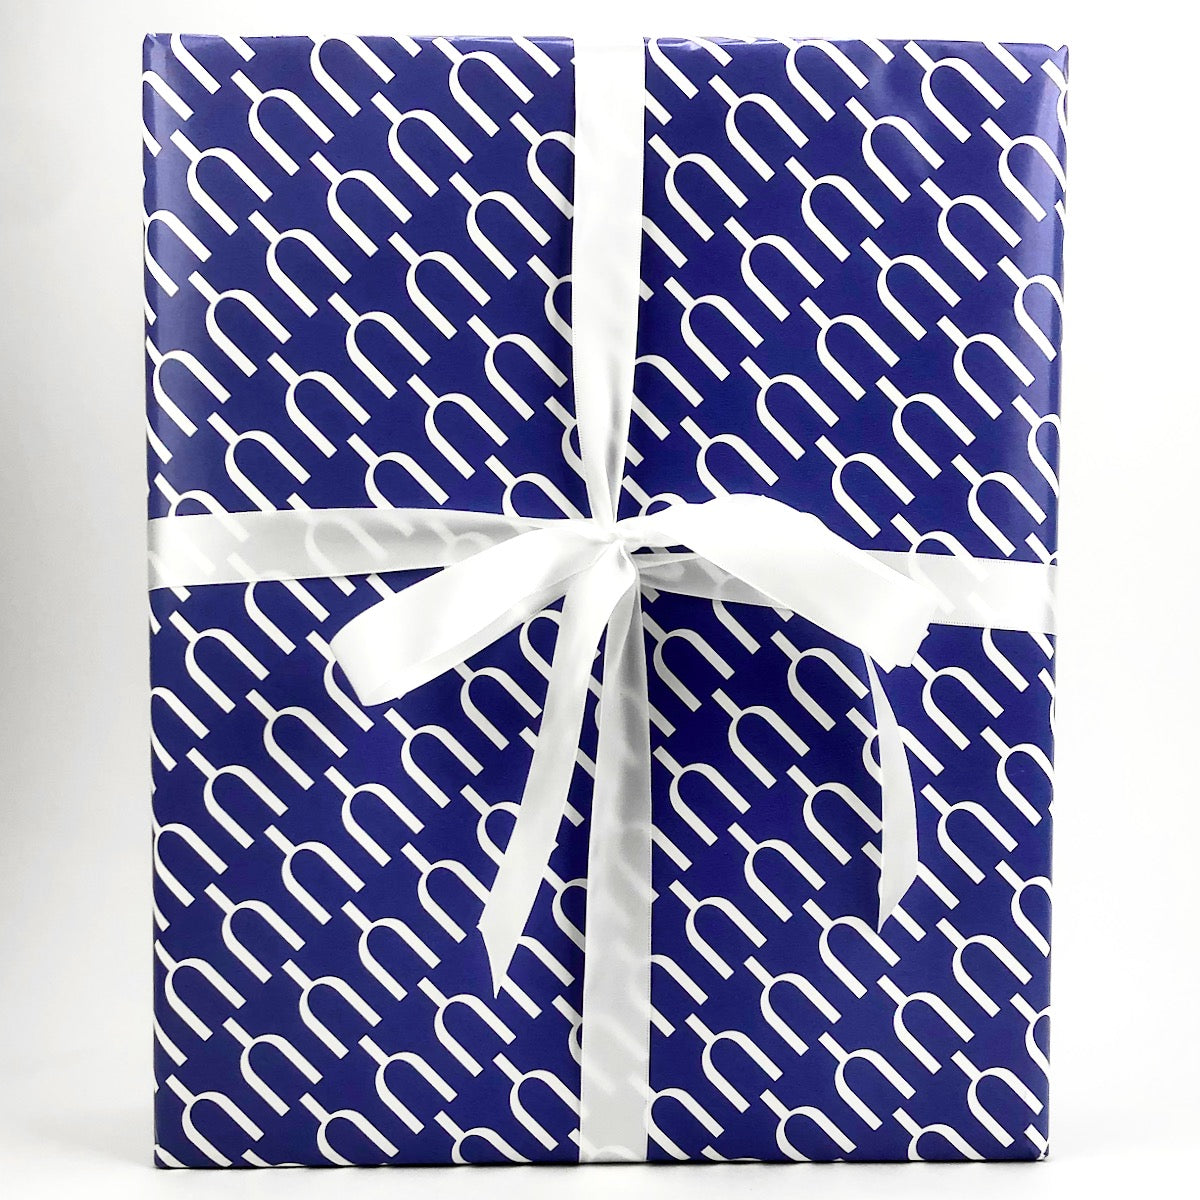 - Gift Wrapping for 3 bottles -